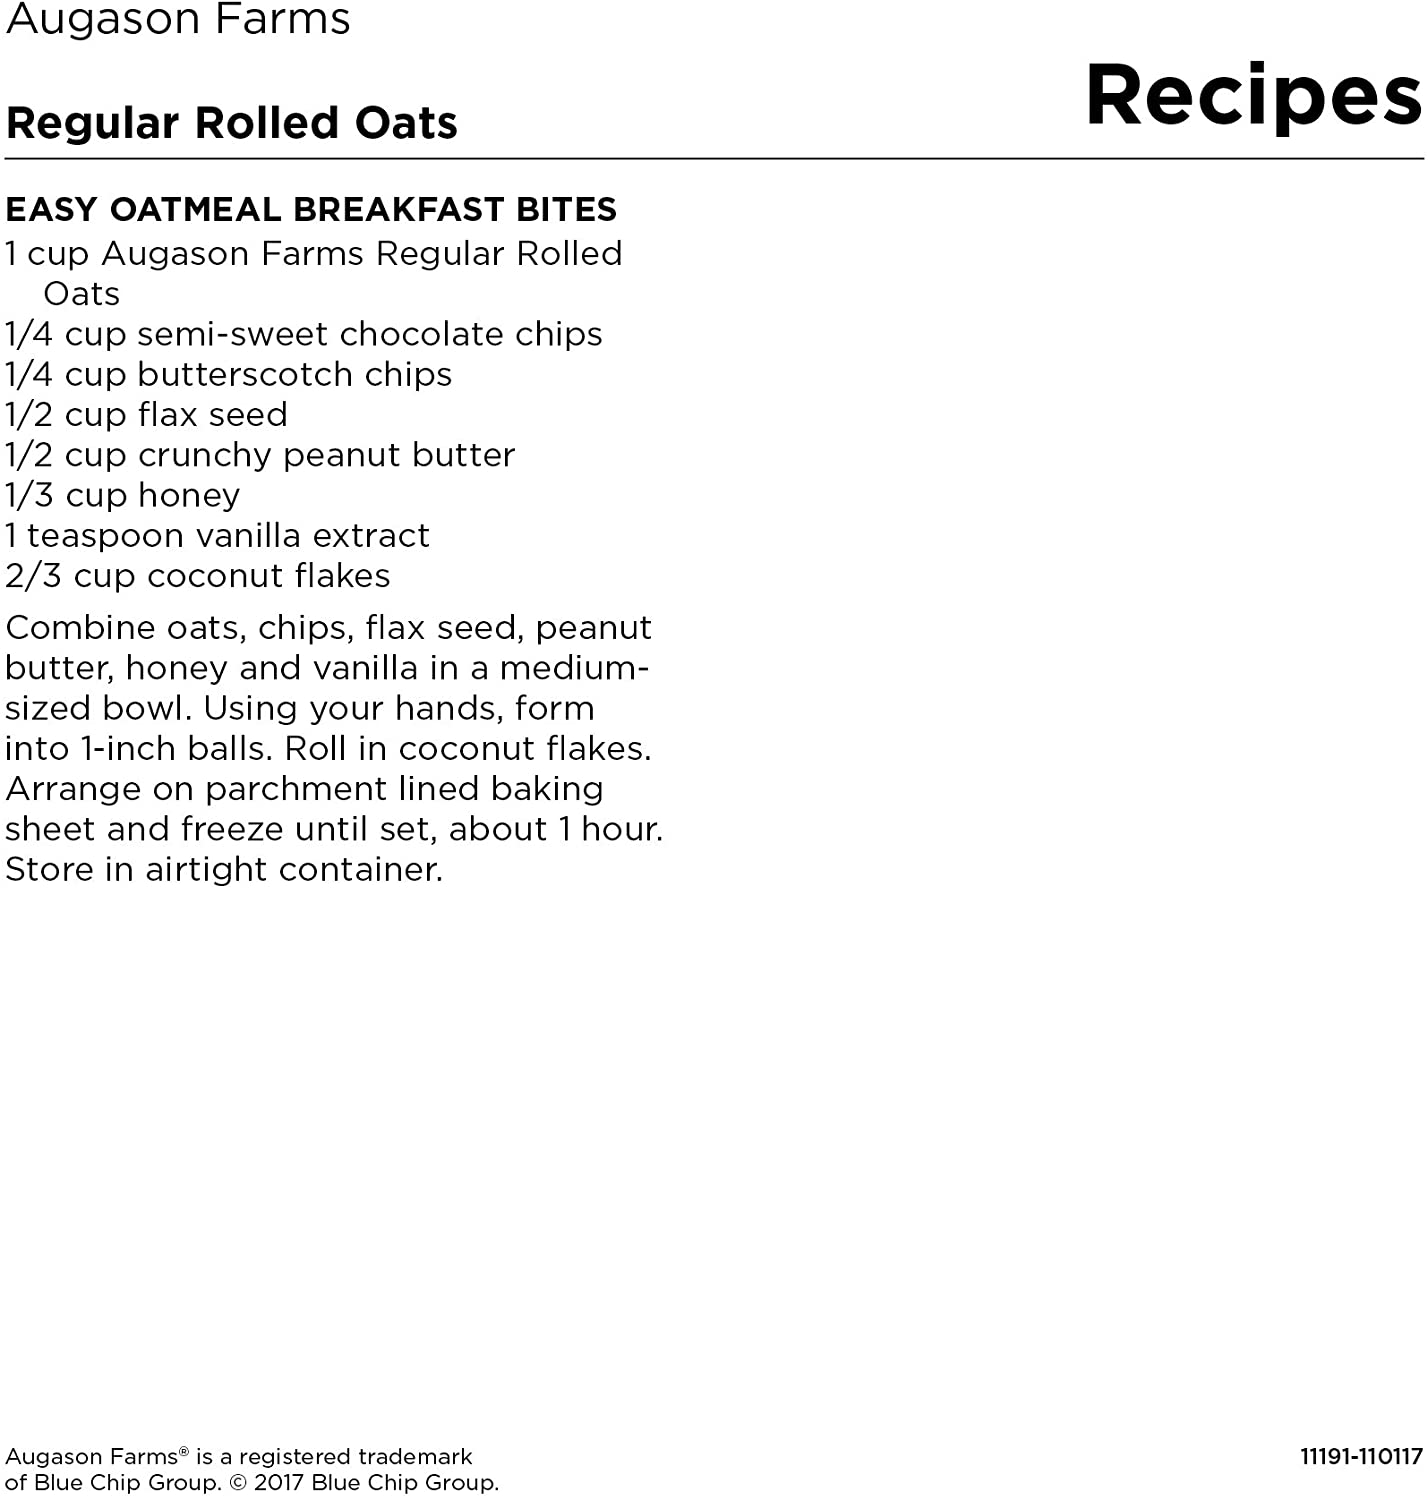 A recipe for rolled oats using Augason Farms Oats Regular 10lb.